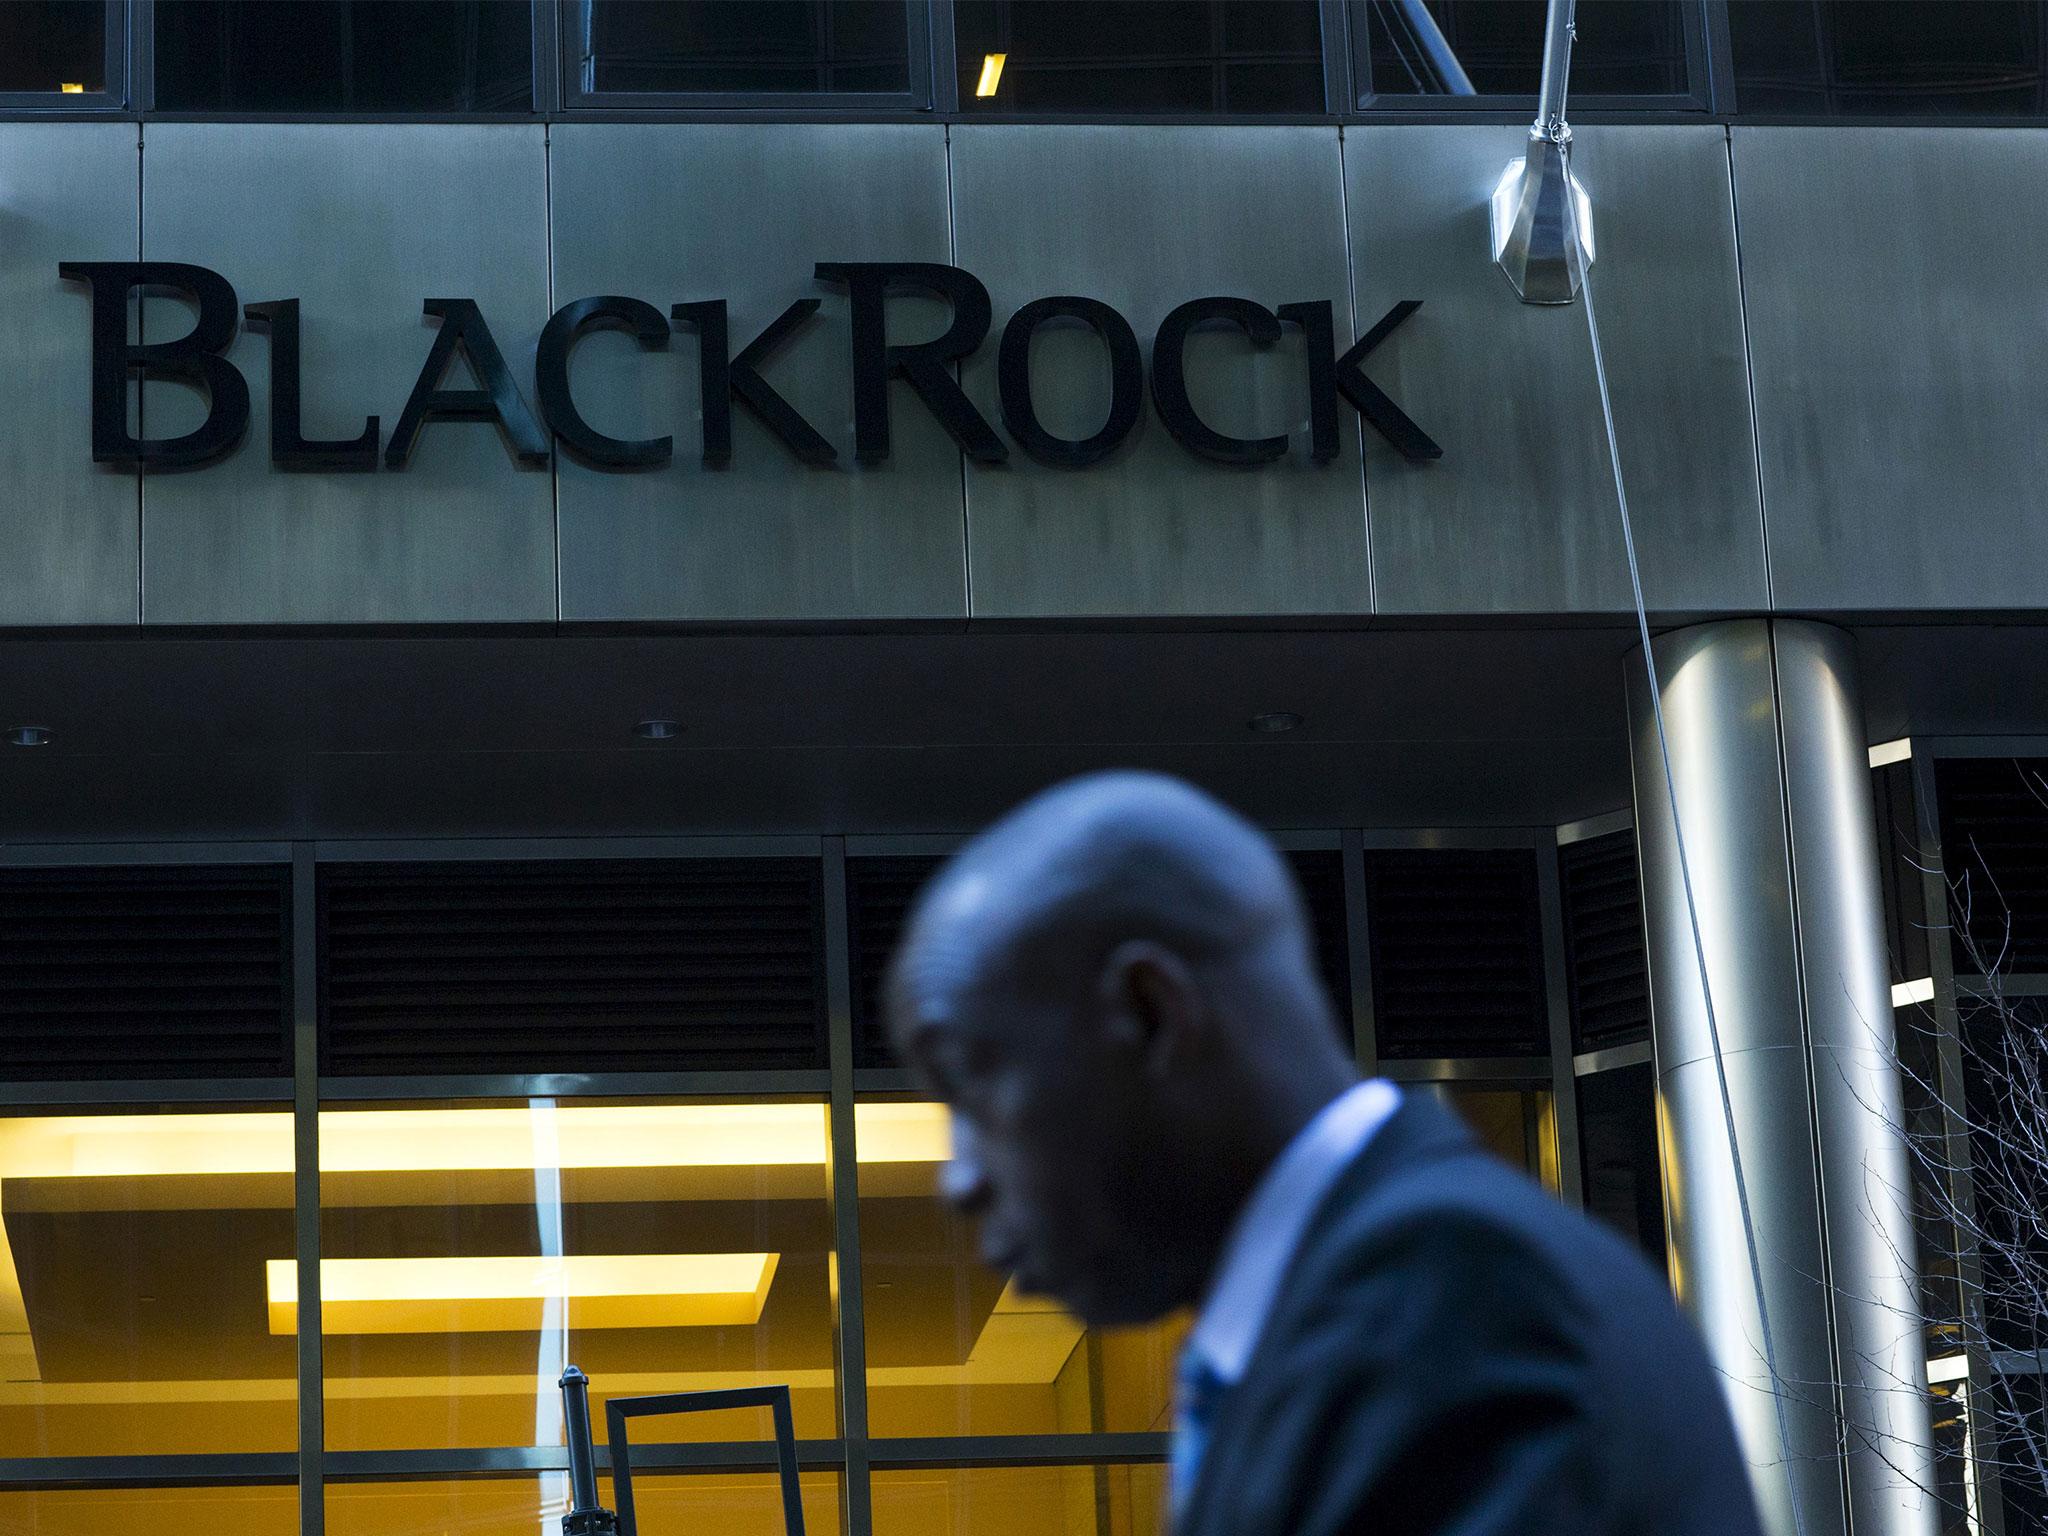 BlackRock chief executive Larry Fink says 'profits are in no way inconsistent with purpose – in fact, profits and purpose are inextricably linked'